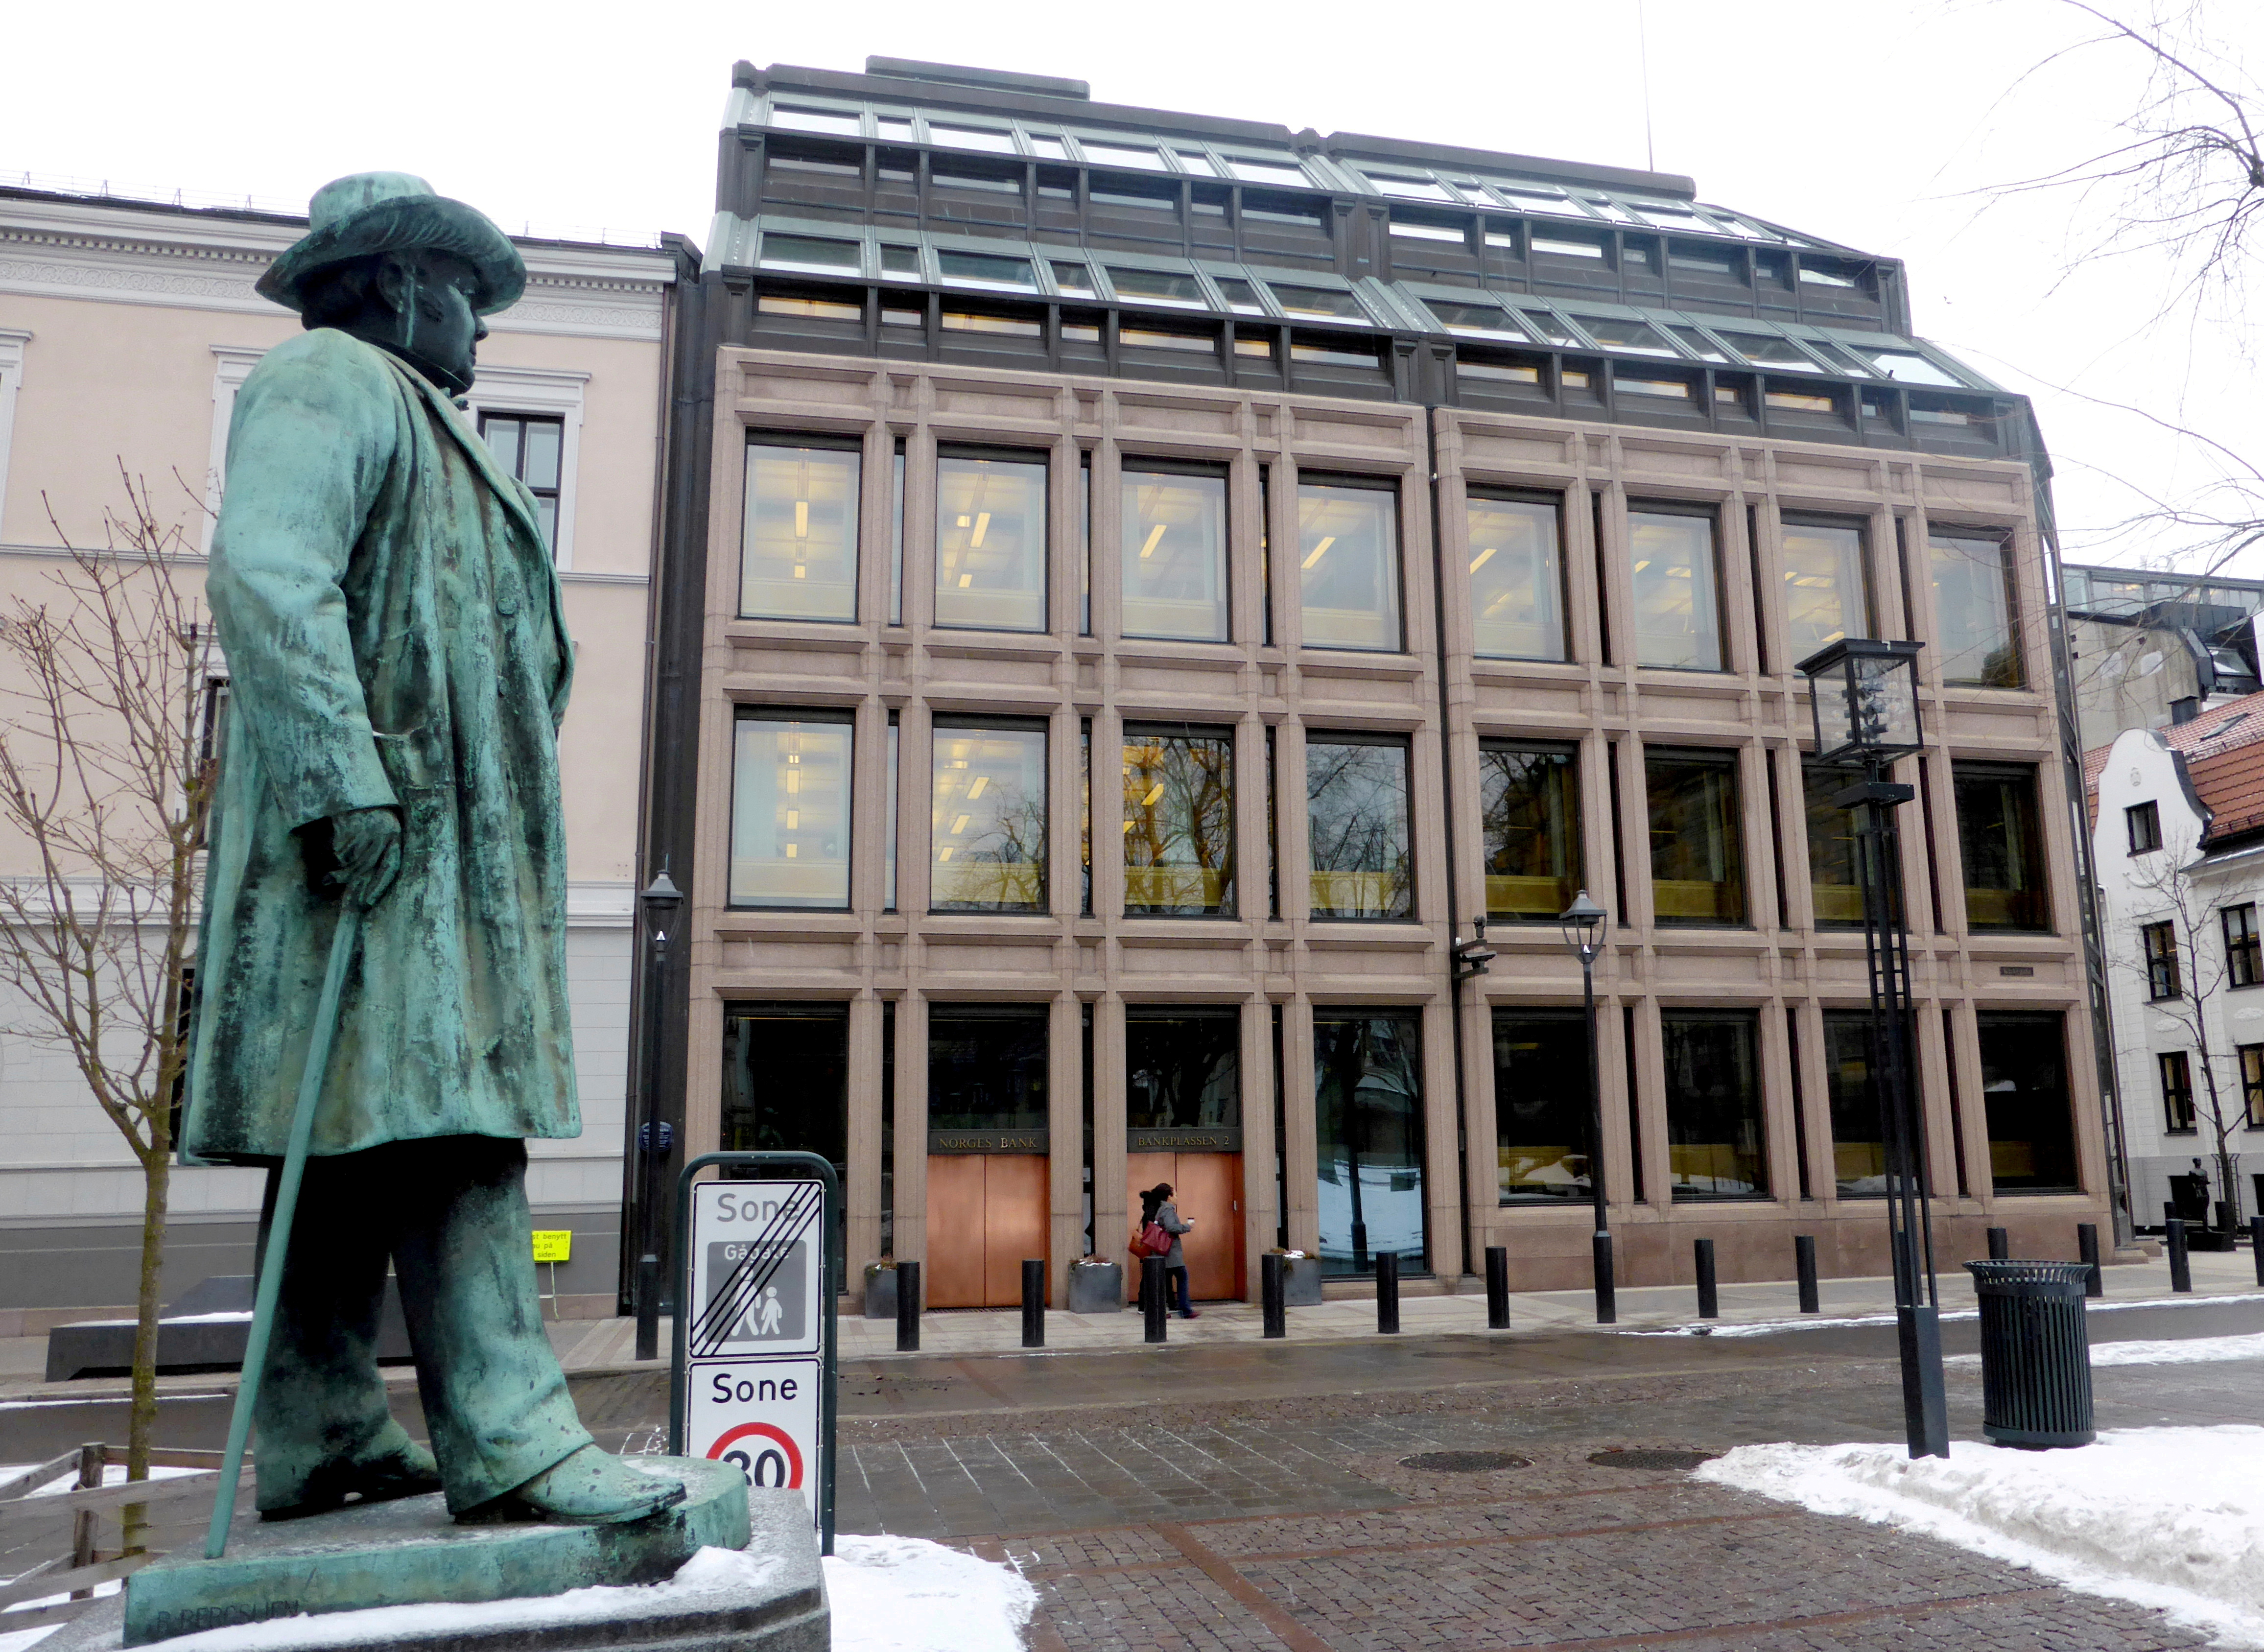 A general view of the Norwegian central bank in Oslo